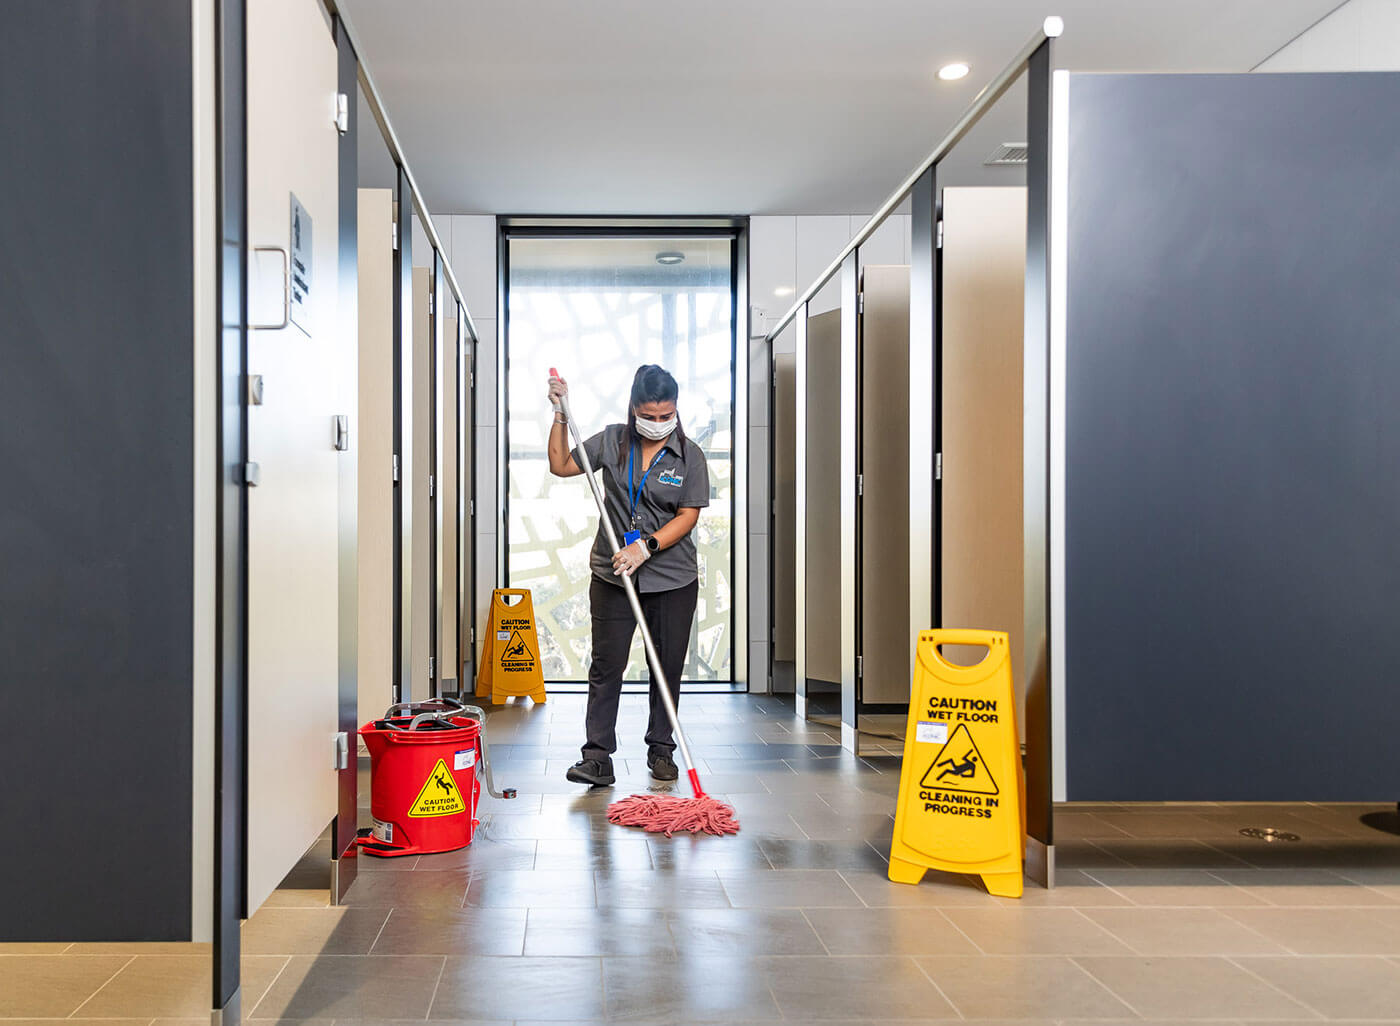 We are Perth’s property service specialists, delivering practical cleaning, security and management service solutions